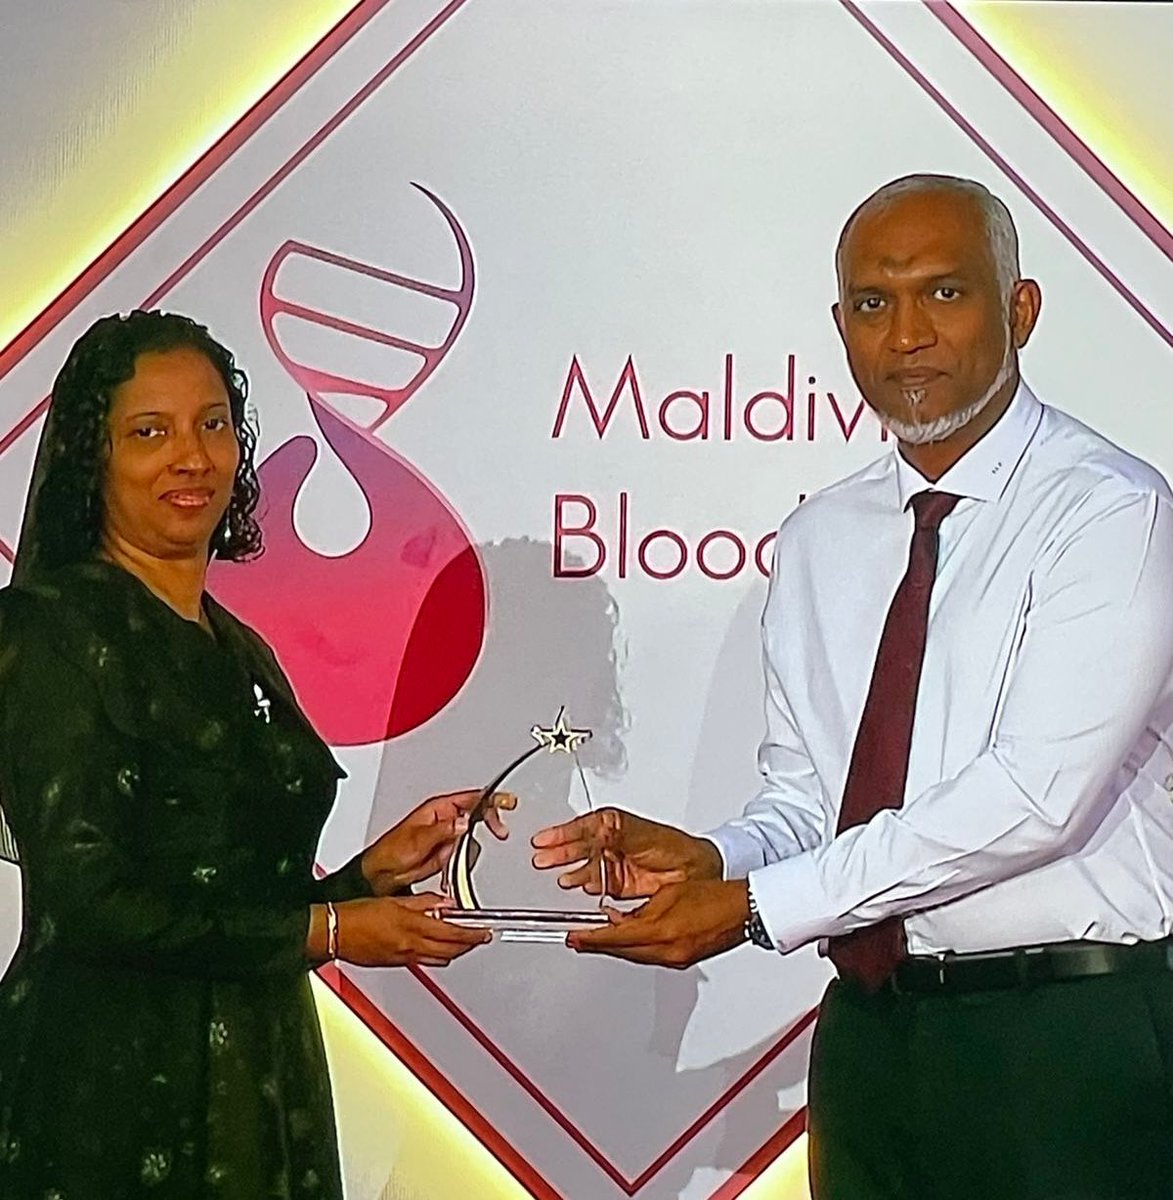 SHE has been honoured with a national recognition for 36 years of dedicated work in preventing thalassemia. We are as ever, committed to continuing our mission of promoting health and wellness in our community. #KulunaaiEku #celebrating36yearsofservice